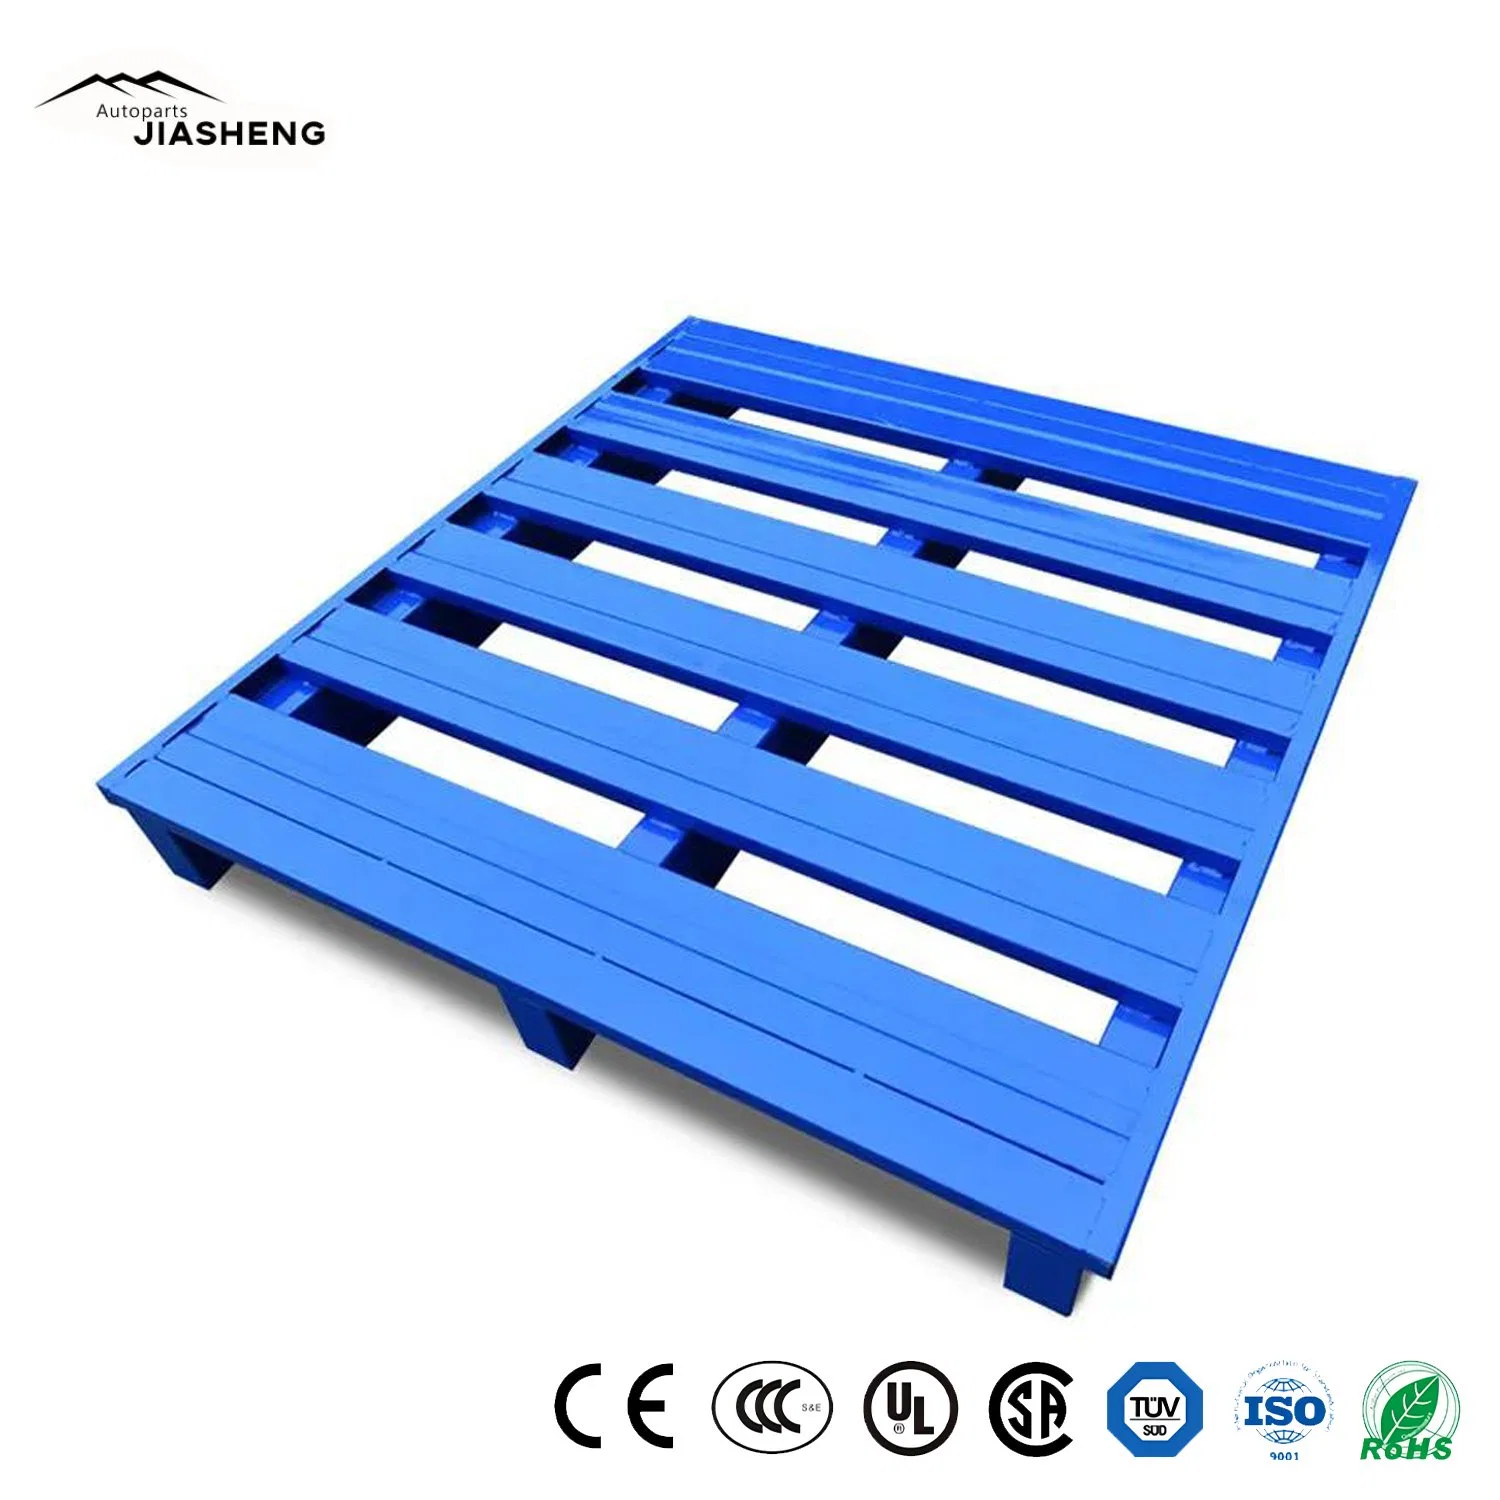 Chinese Manufacturers Direct Factory of Carbon Steel Stainless Steel Aluminum Stacking Pallets Global Sell